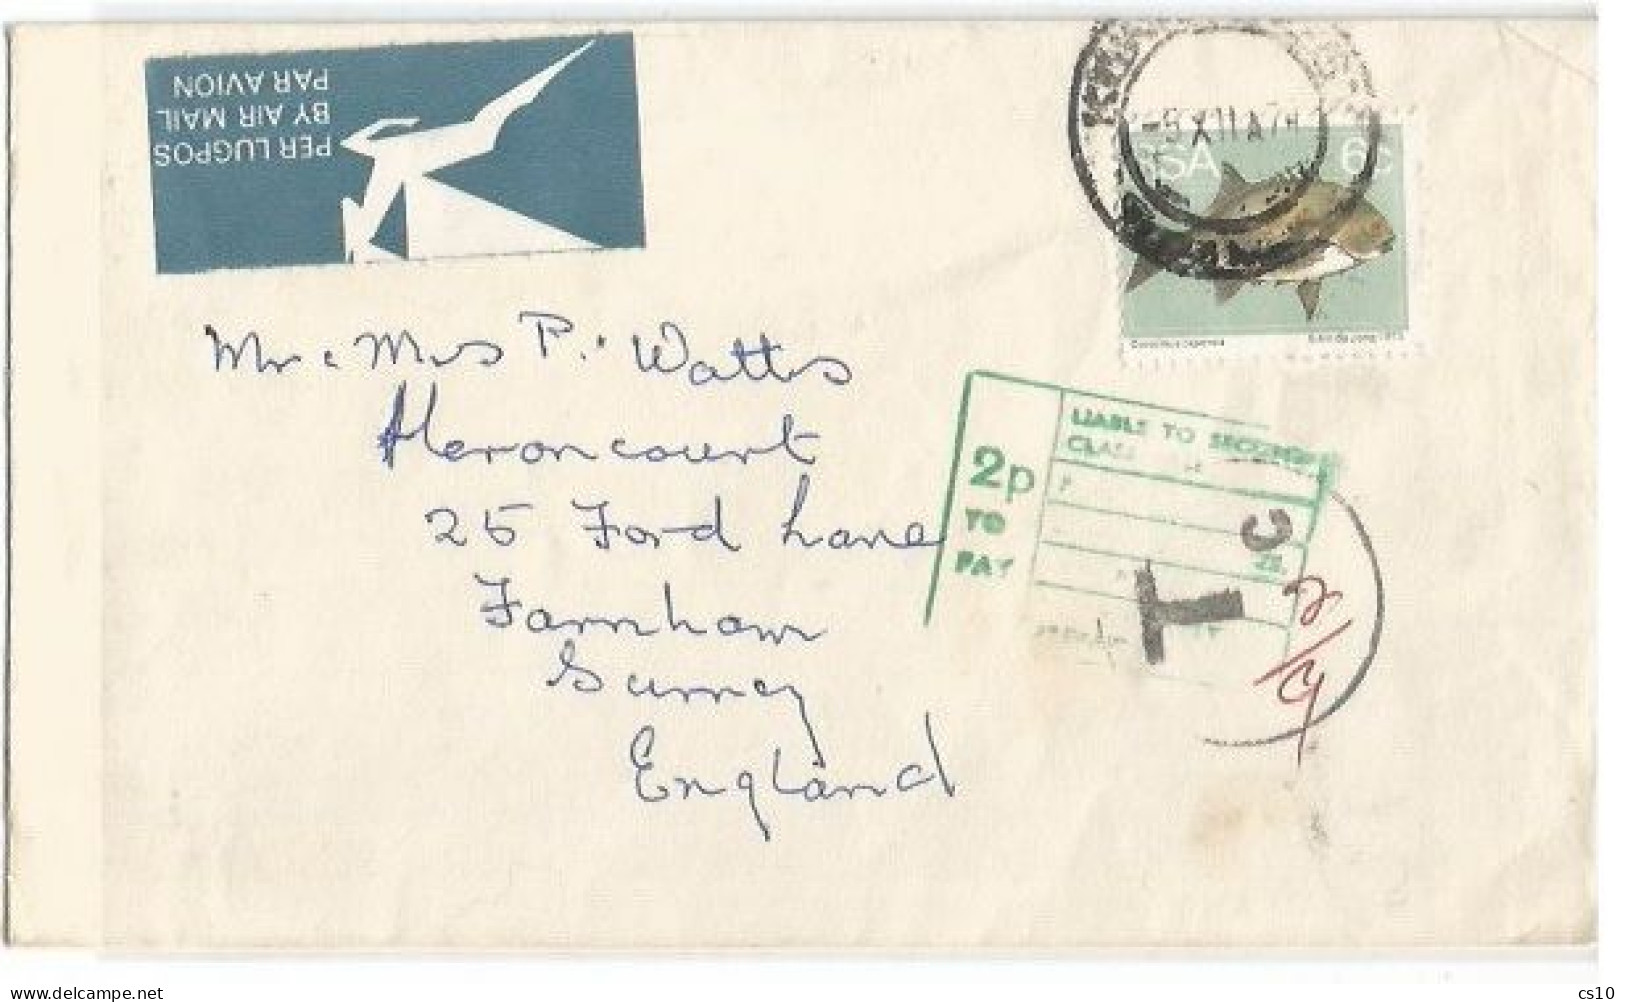 South Africa AirmailCV Kimberley 5dec1974 With Regular C6 Underfranked AND Taxed 2/9 On PMK 2p In UK - Covers & Documents